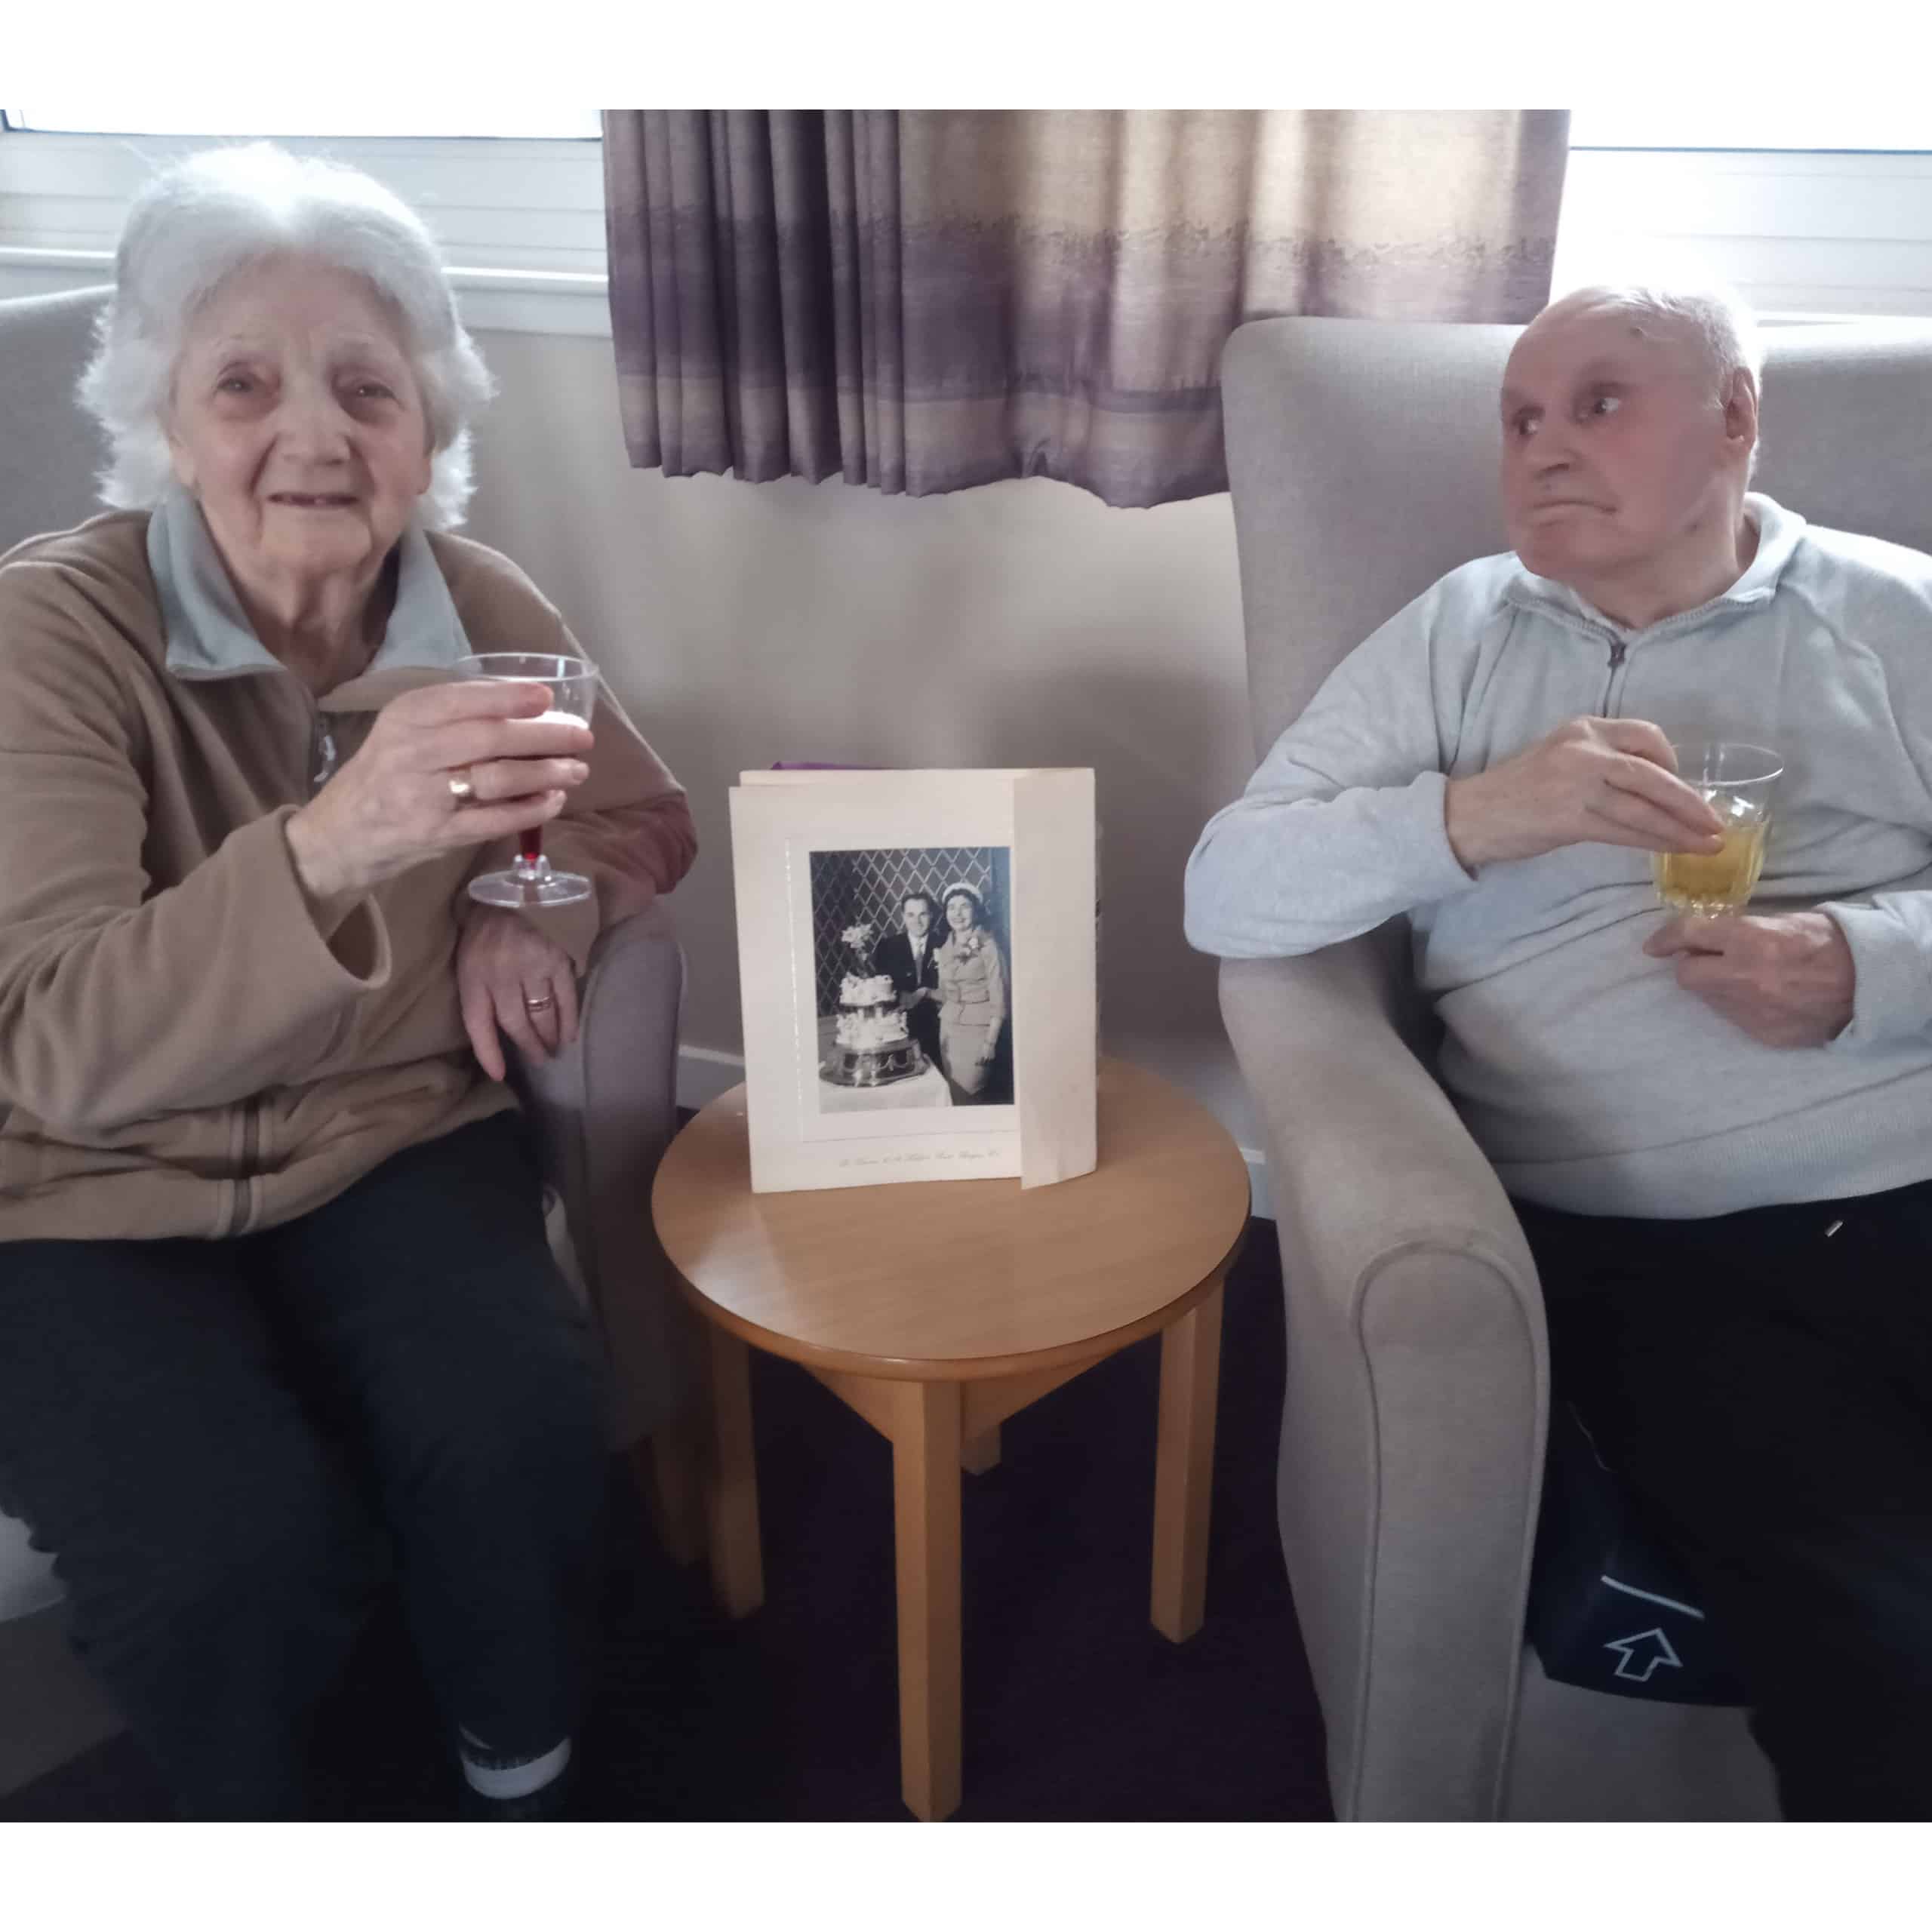 Kingsgate Care Home residents Helen and Danny Falloon with their wedding photo on their 63rd anniversary.